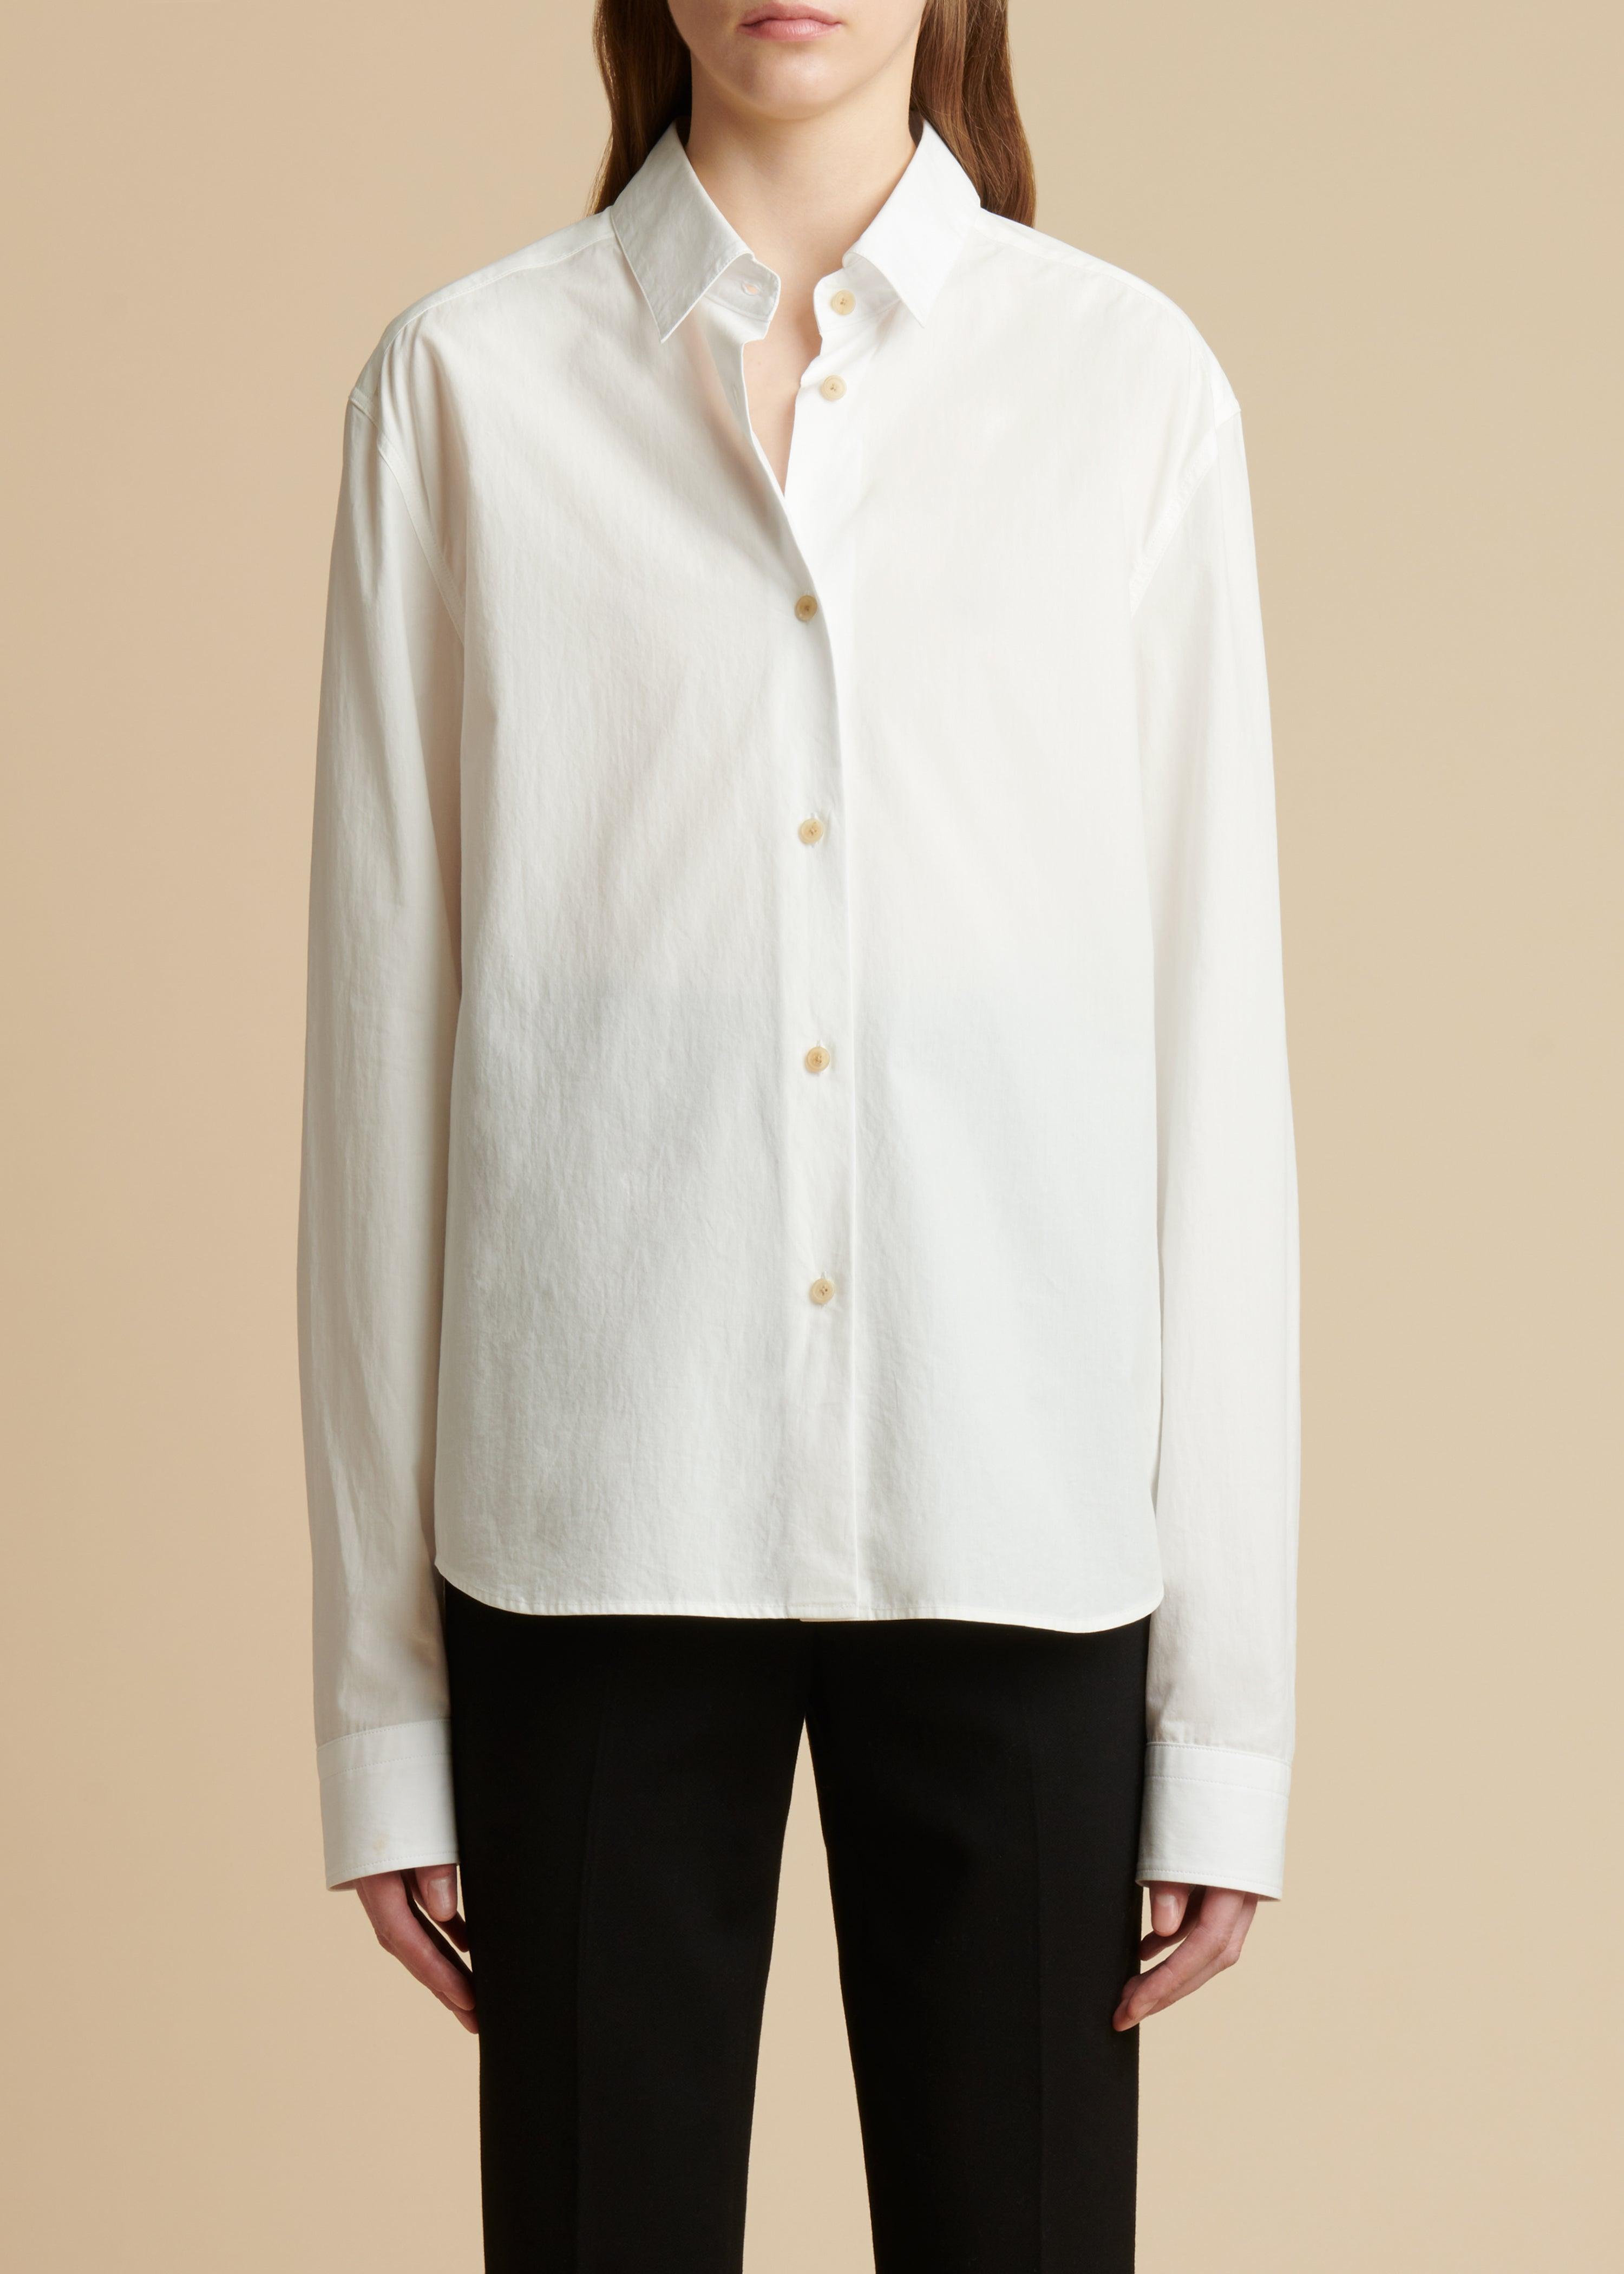 The Argo Top in White - The Iconic Issue